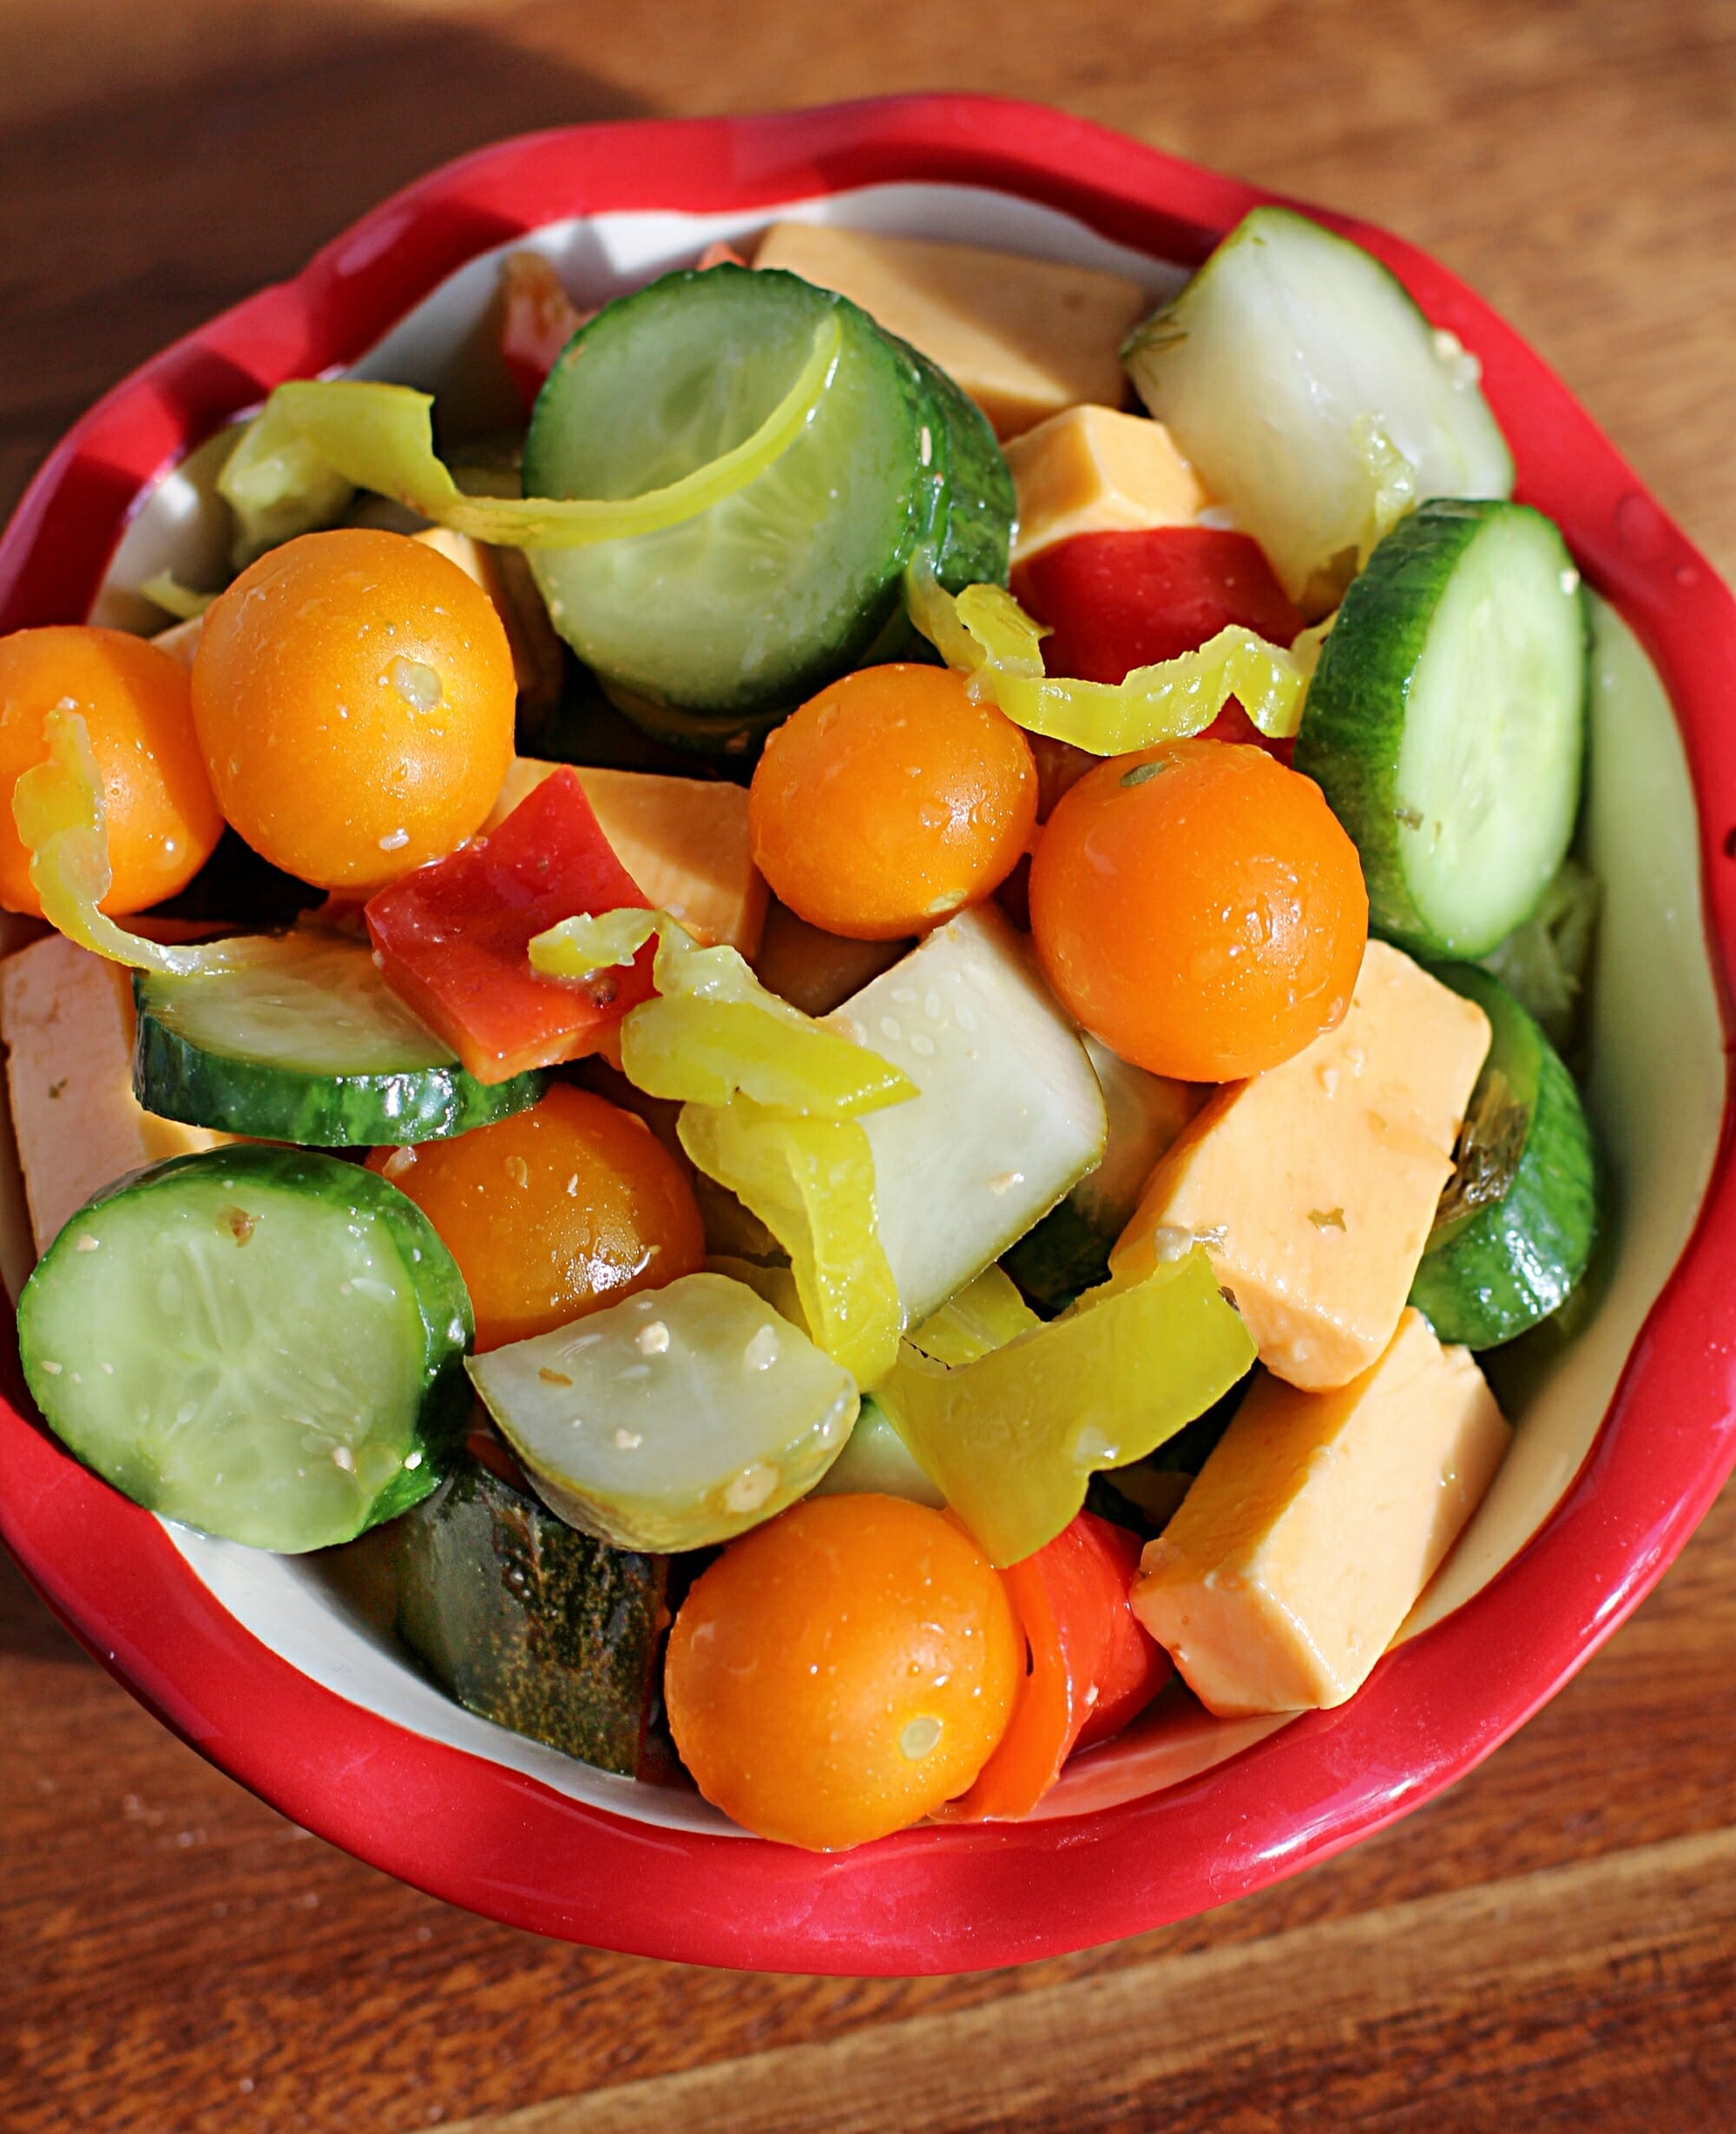 A red and white side dish is filled with chopped cucumbers, pickles, sliced pepperoncini, cubed cheddar cheese and ripe cherry tomatoes.